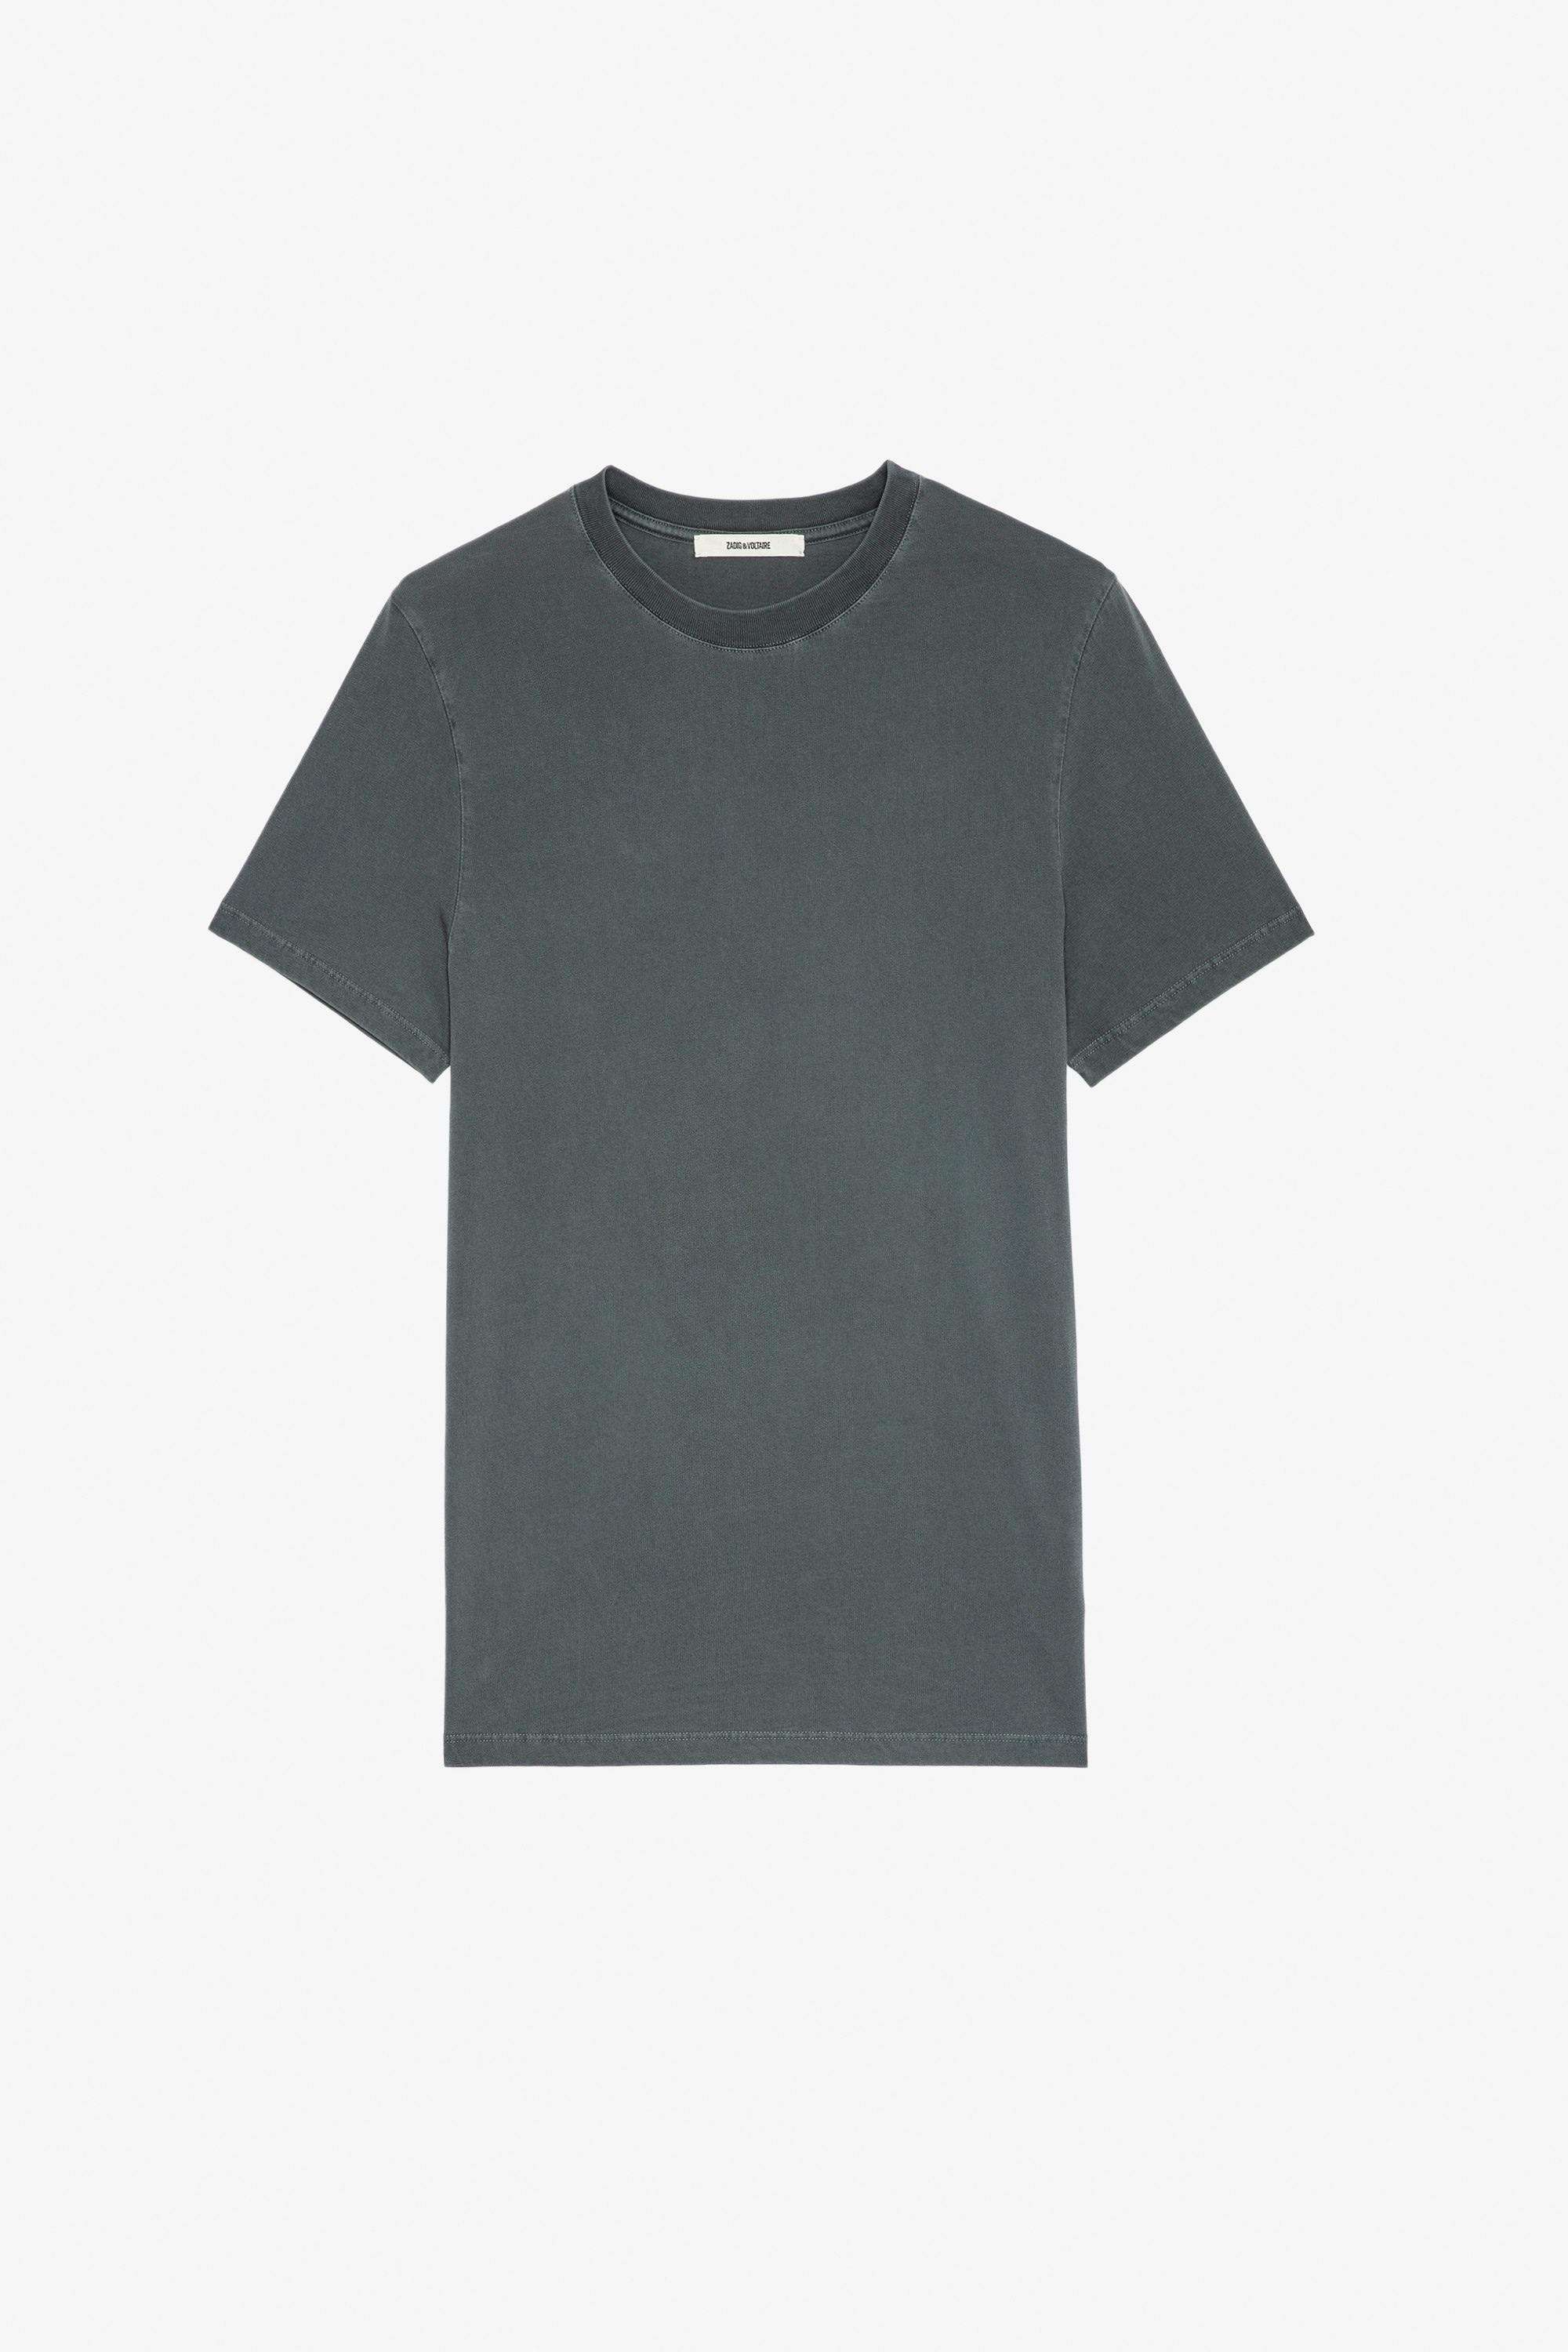 Tommy T-shirt Men’s grey cotton T-shirt with a photoprint on the back